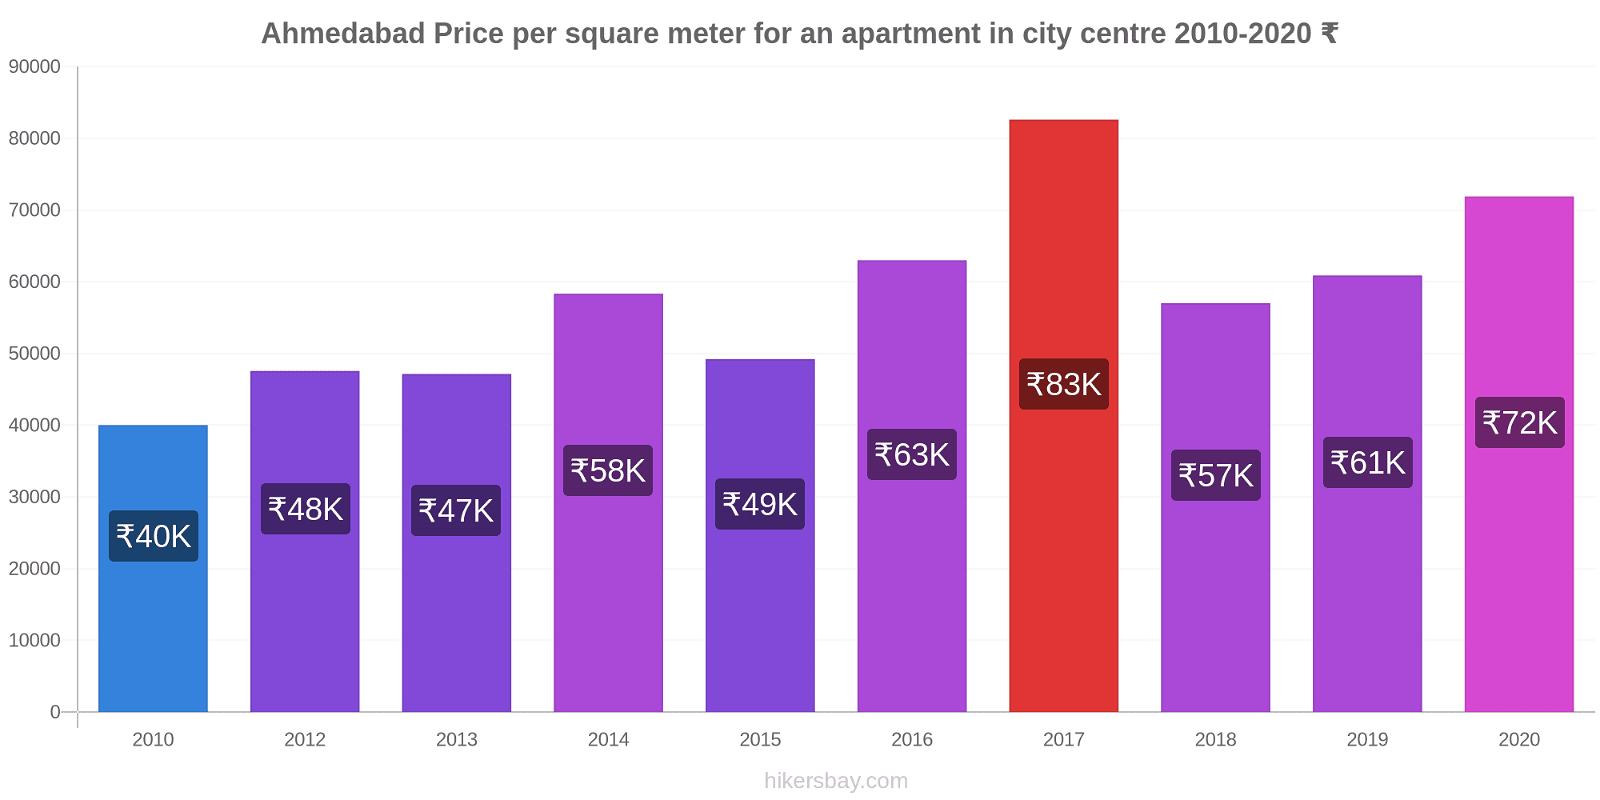 Ahmedabad price changes Price per square meter for an apartment in city centre hikersbay.com